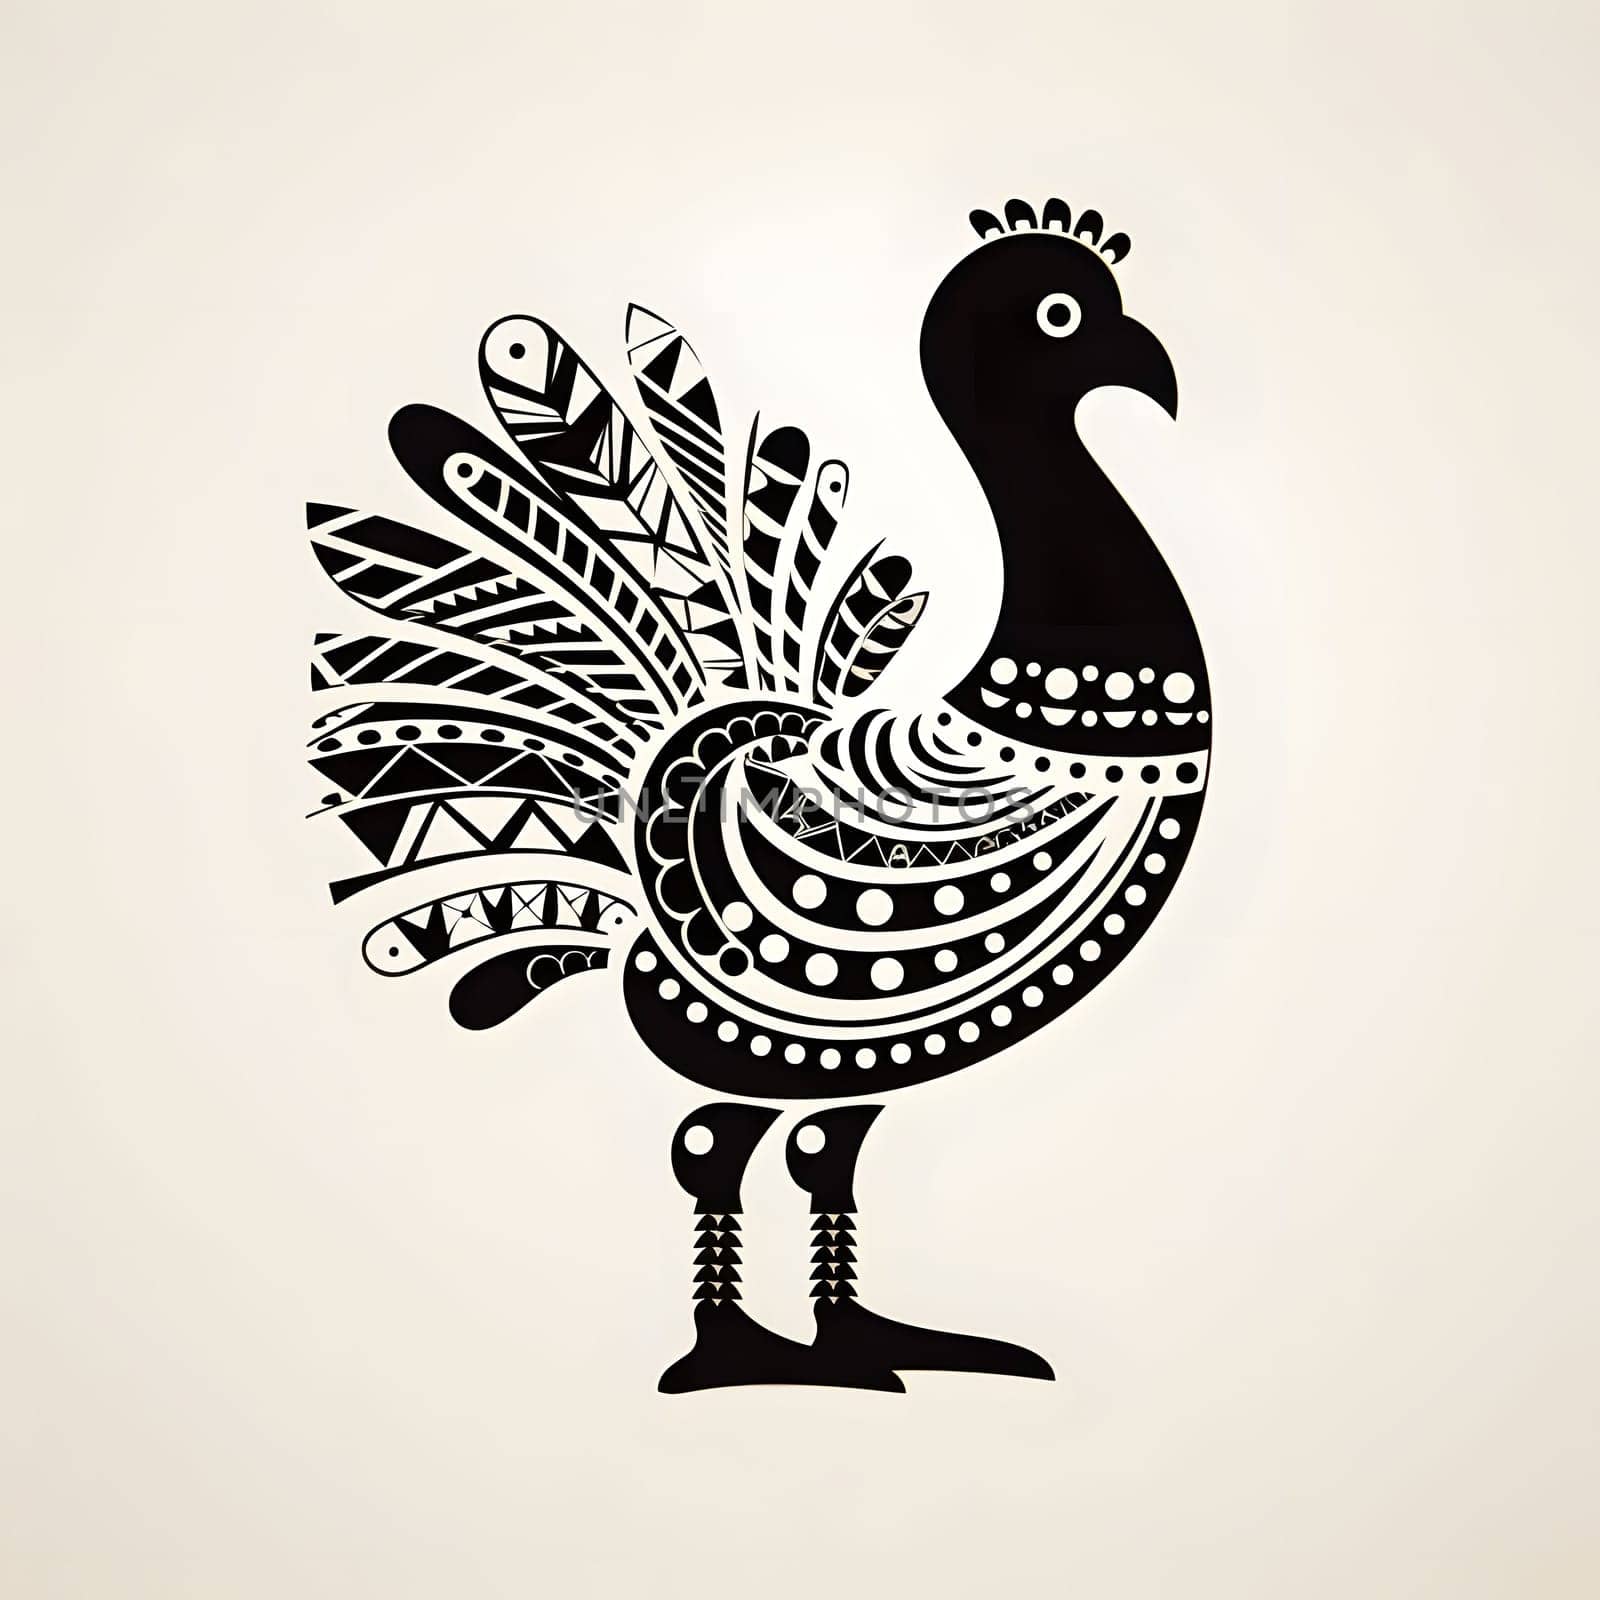 Logo composition, patterned silhouette of a turkey on a solid background. Turkey as the main dish of thanksgiving for the harvest. An atmosphere of joy and celebration.